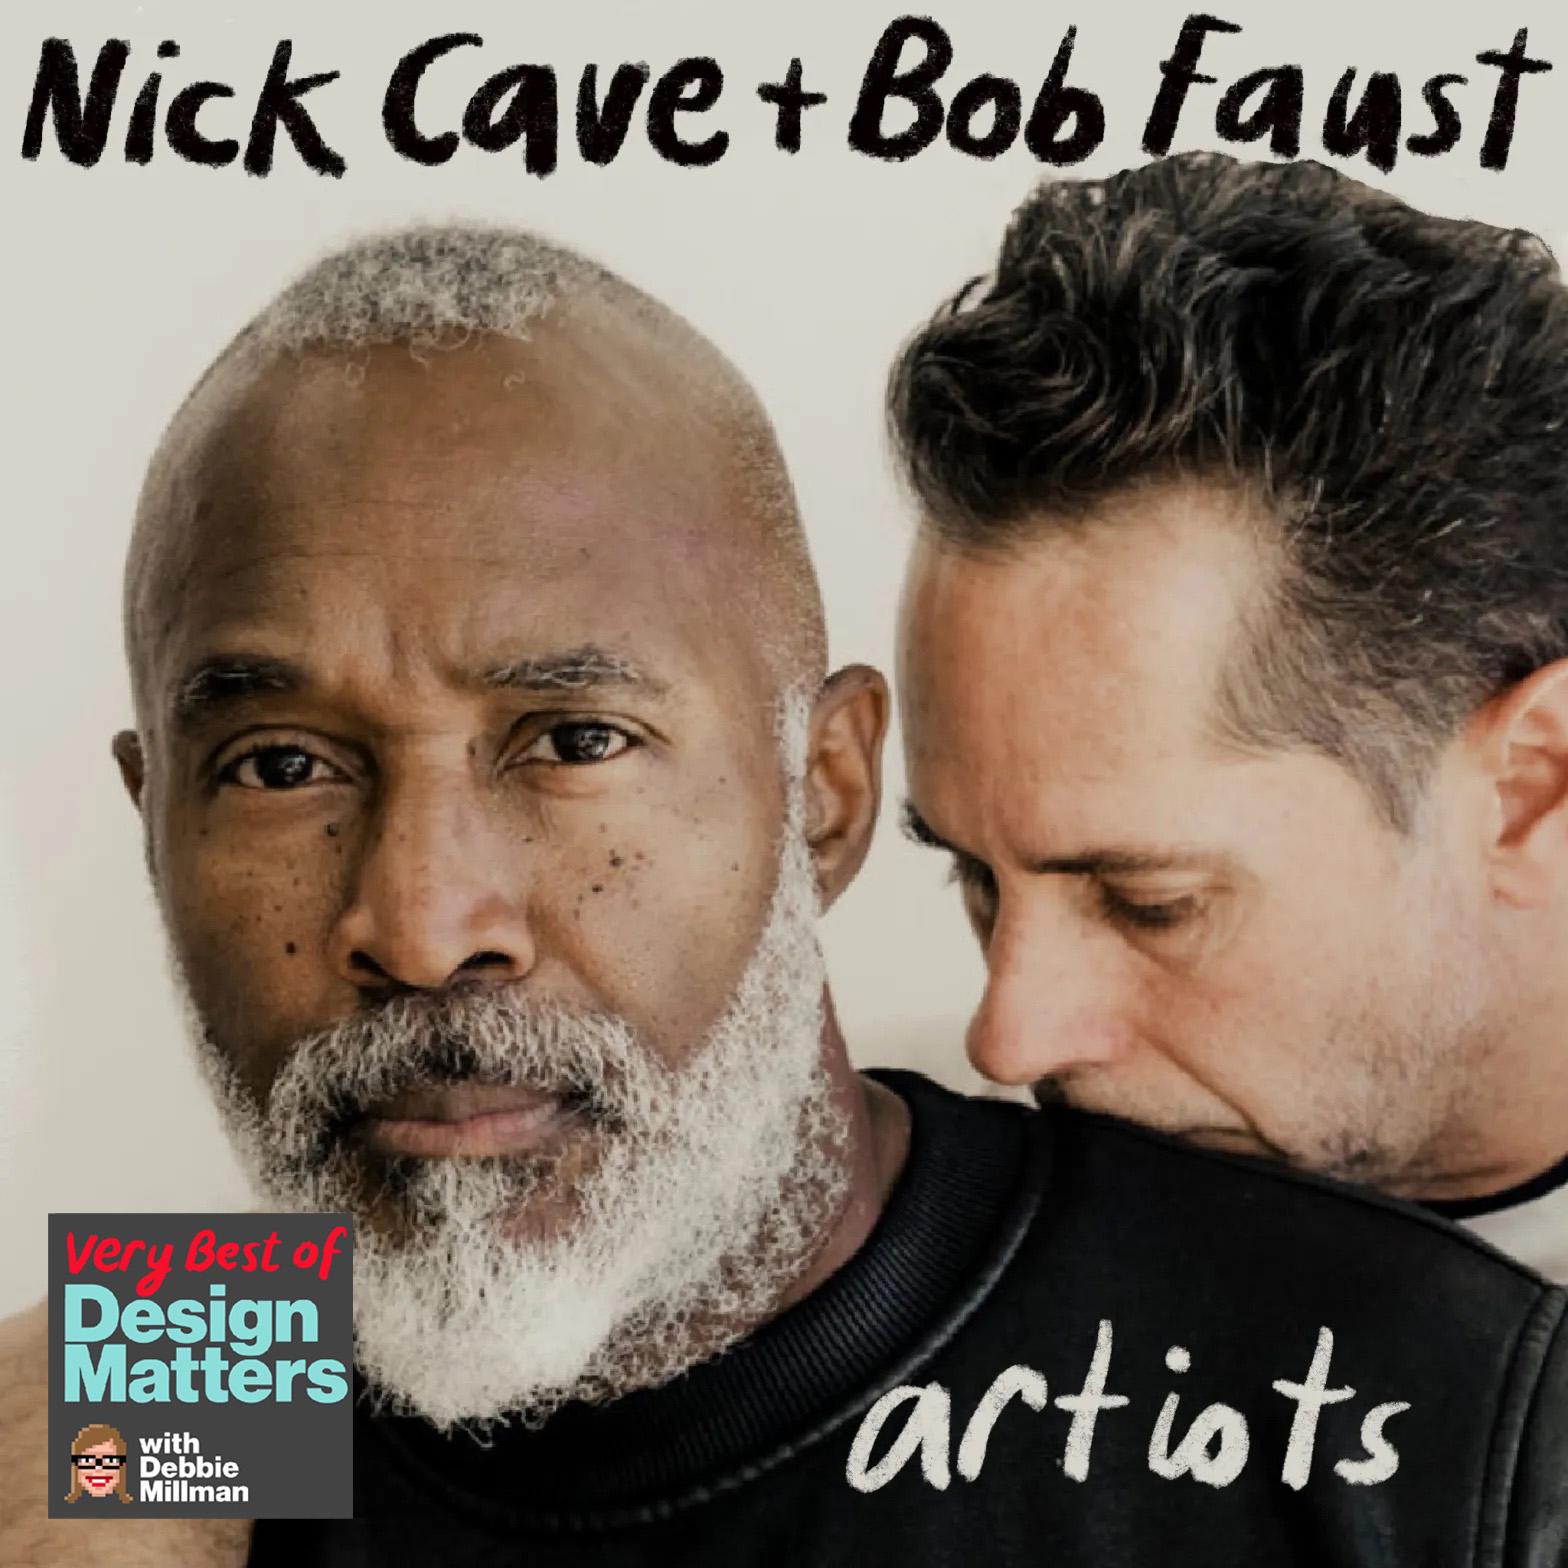 Thumbnail for "Best of Design Matters: Nick Cave & Bob Faust".